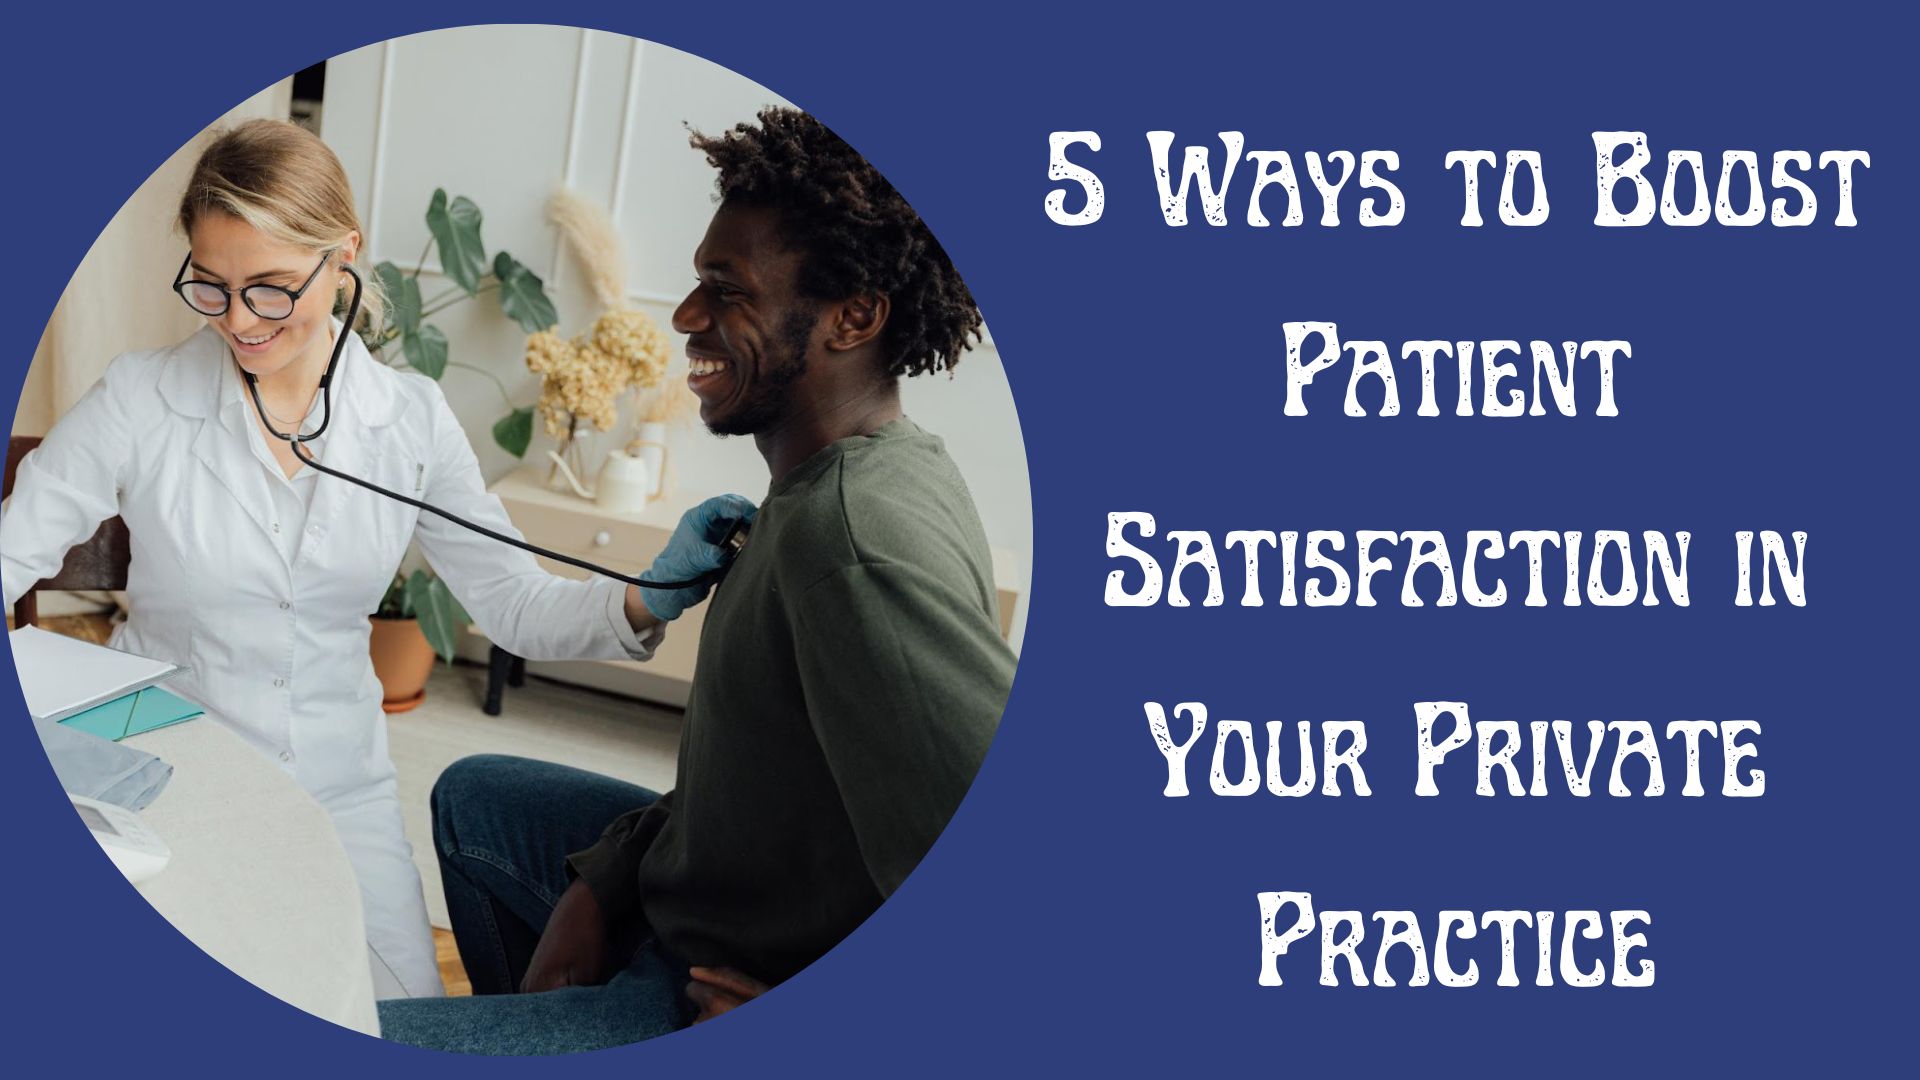 5 Ways to Boost Patient Satisfaction in Your Private Practice